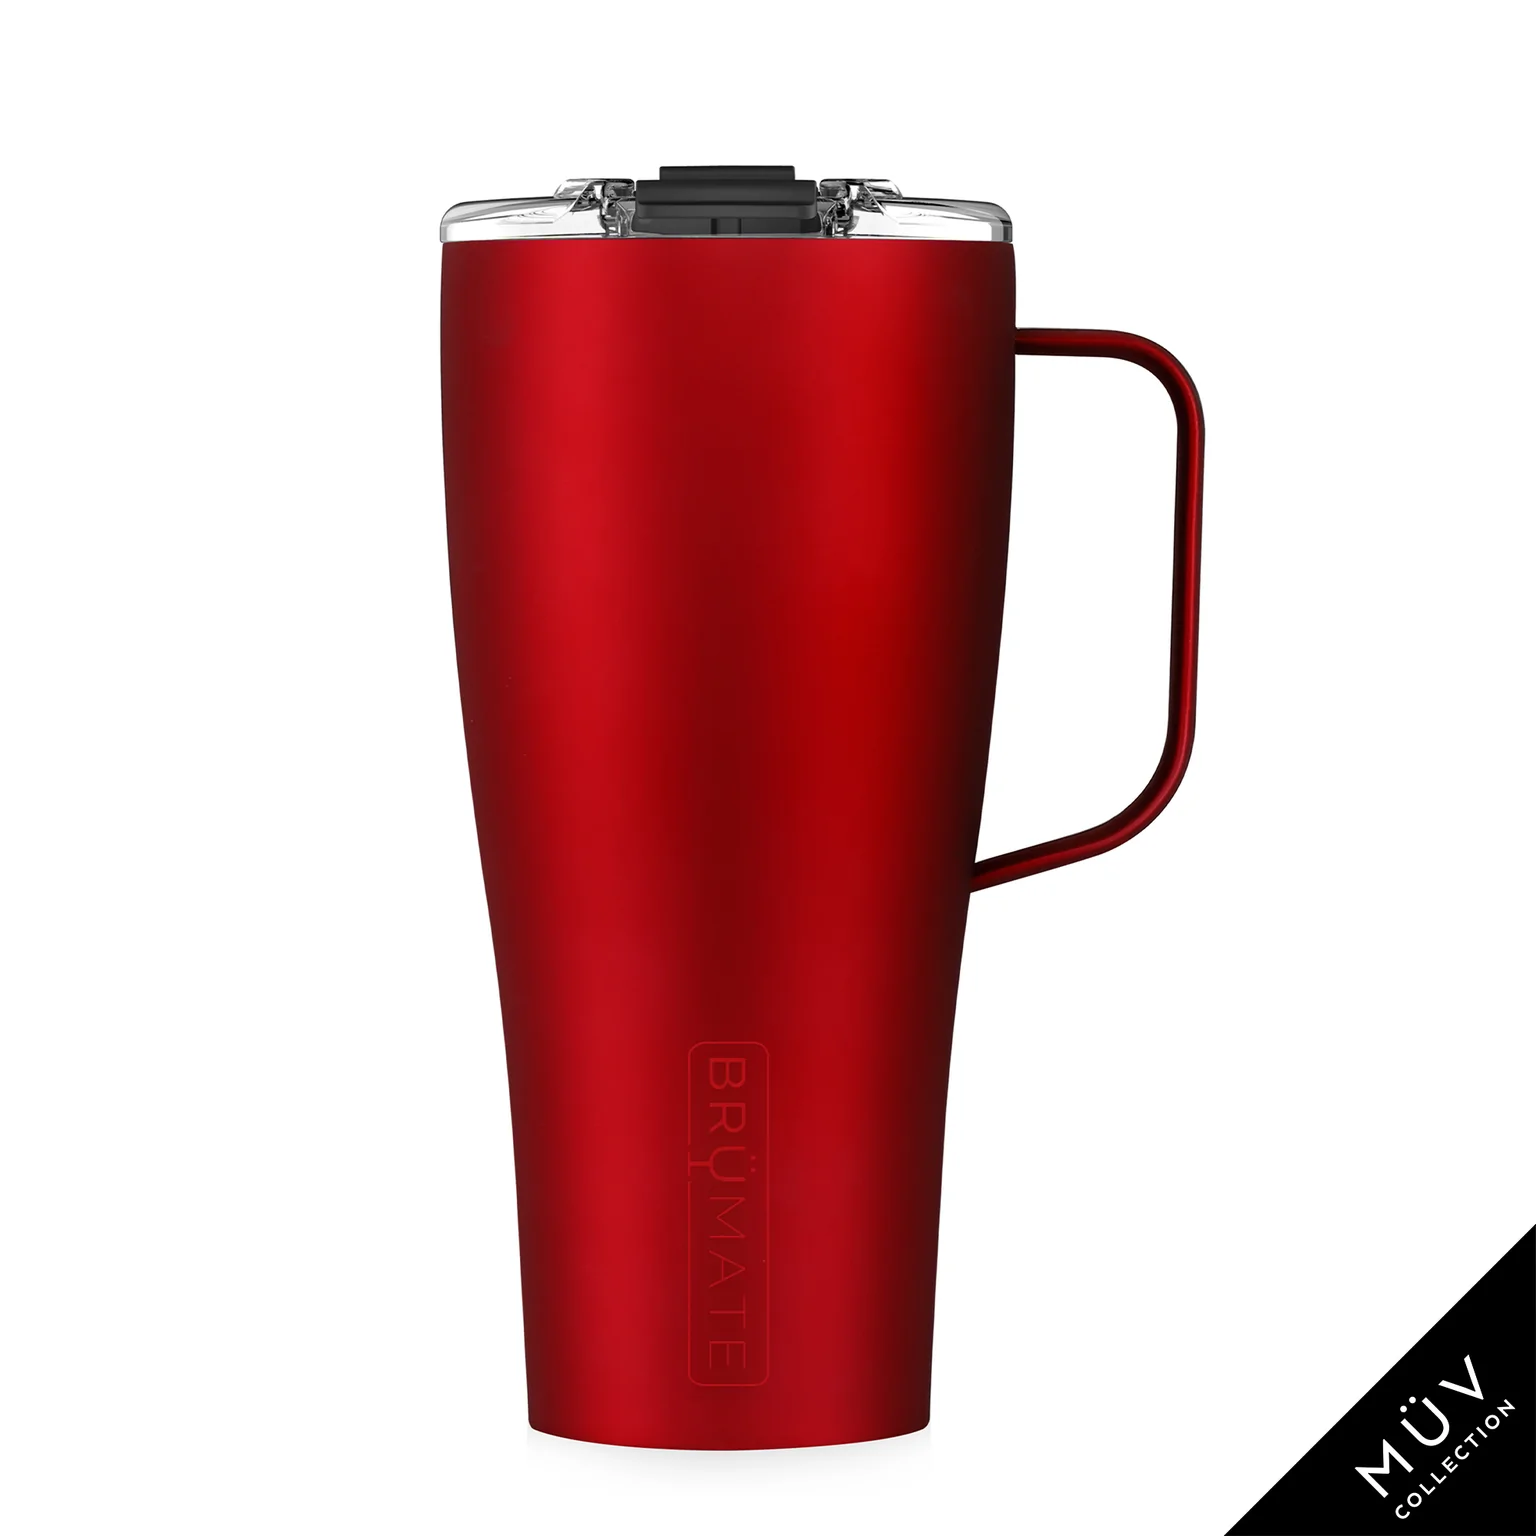 Brumate Toddy XL 32 Oz Coffee Mug Red Velvet (PLEASE SEE BLEMISHES AND  MARKS)